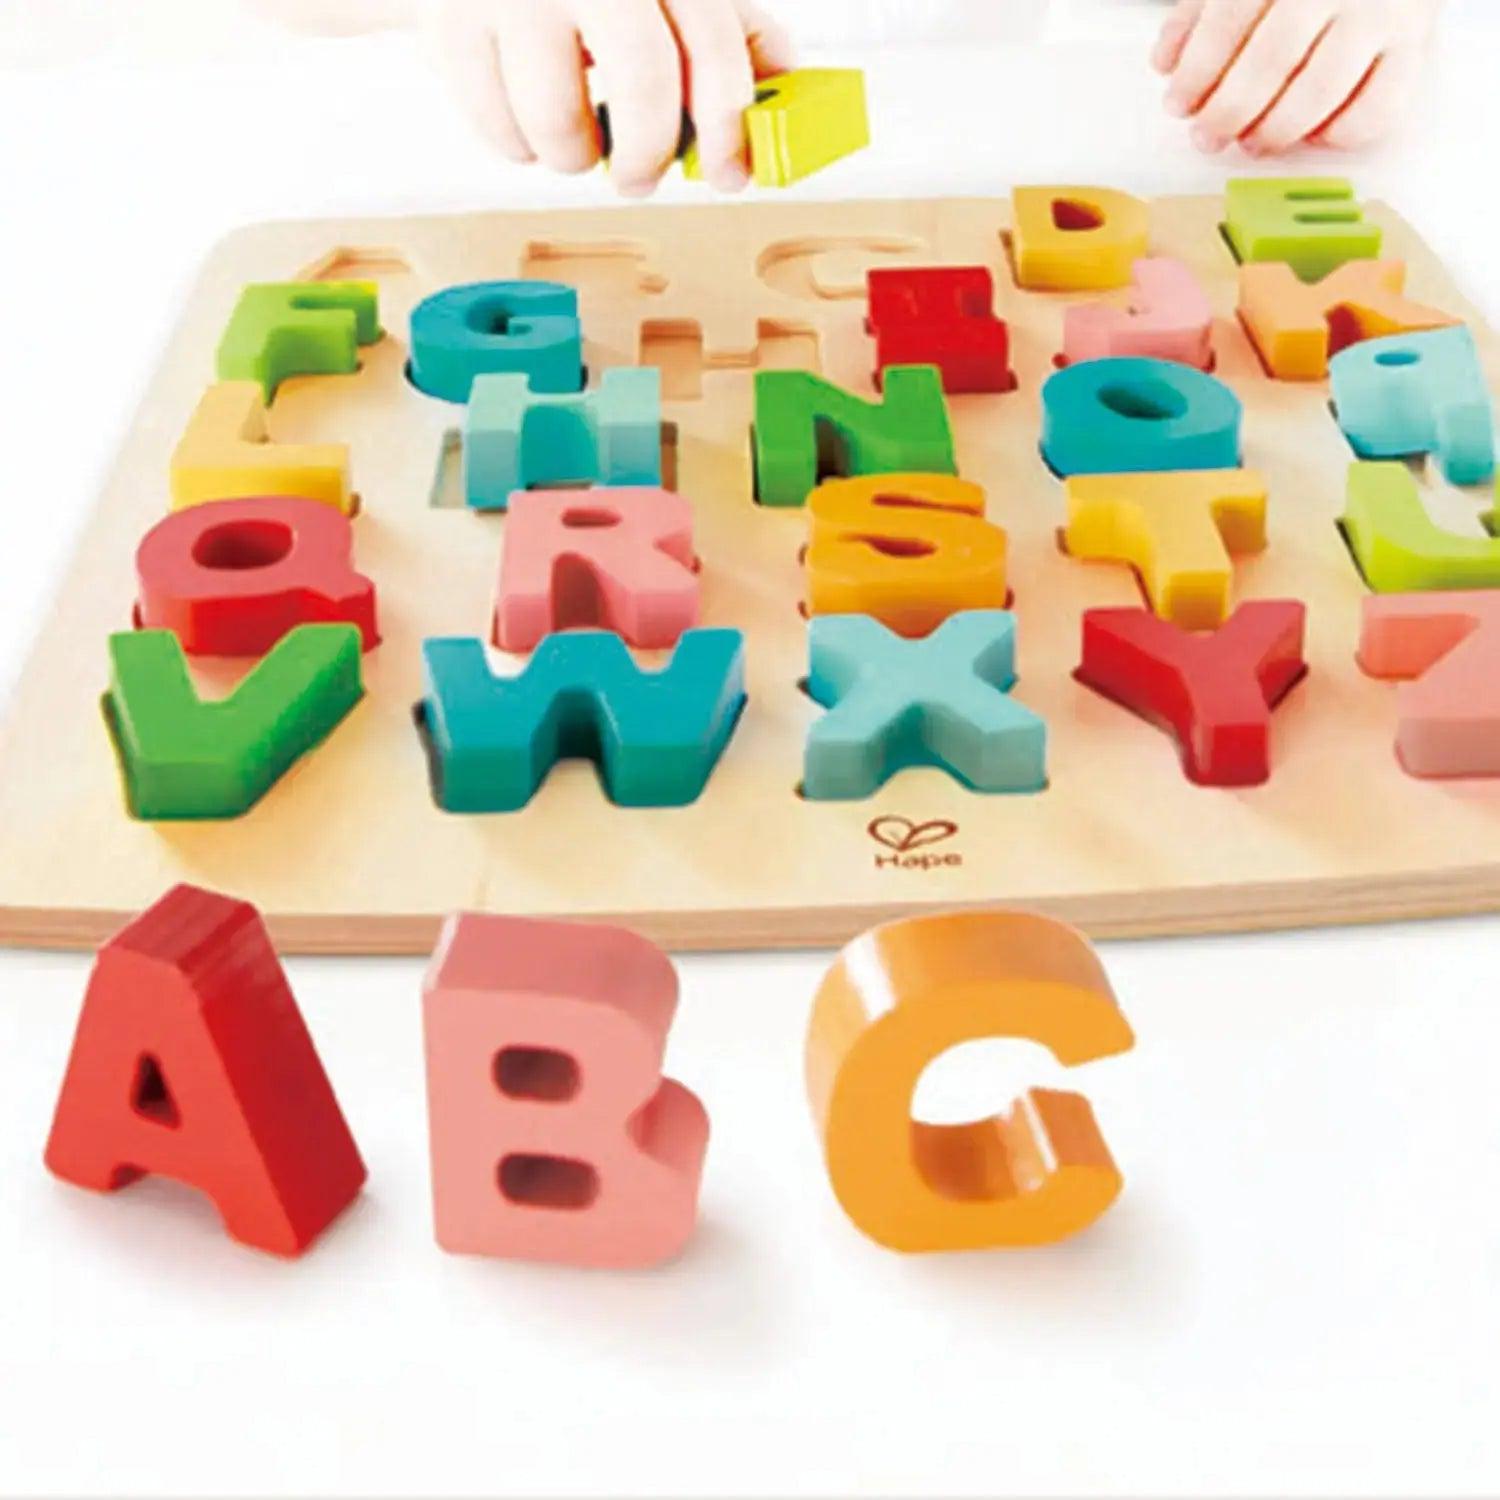 Chunky Alphabet Puzzle-Puzzles-Hape-Yellow Springs Toy Company